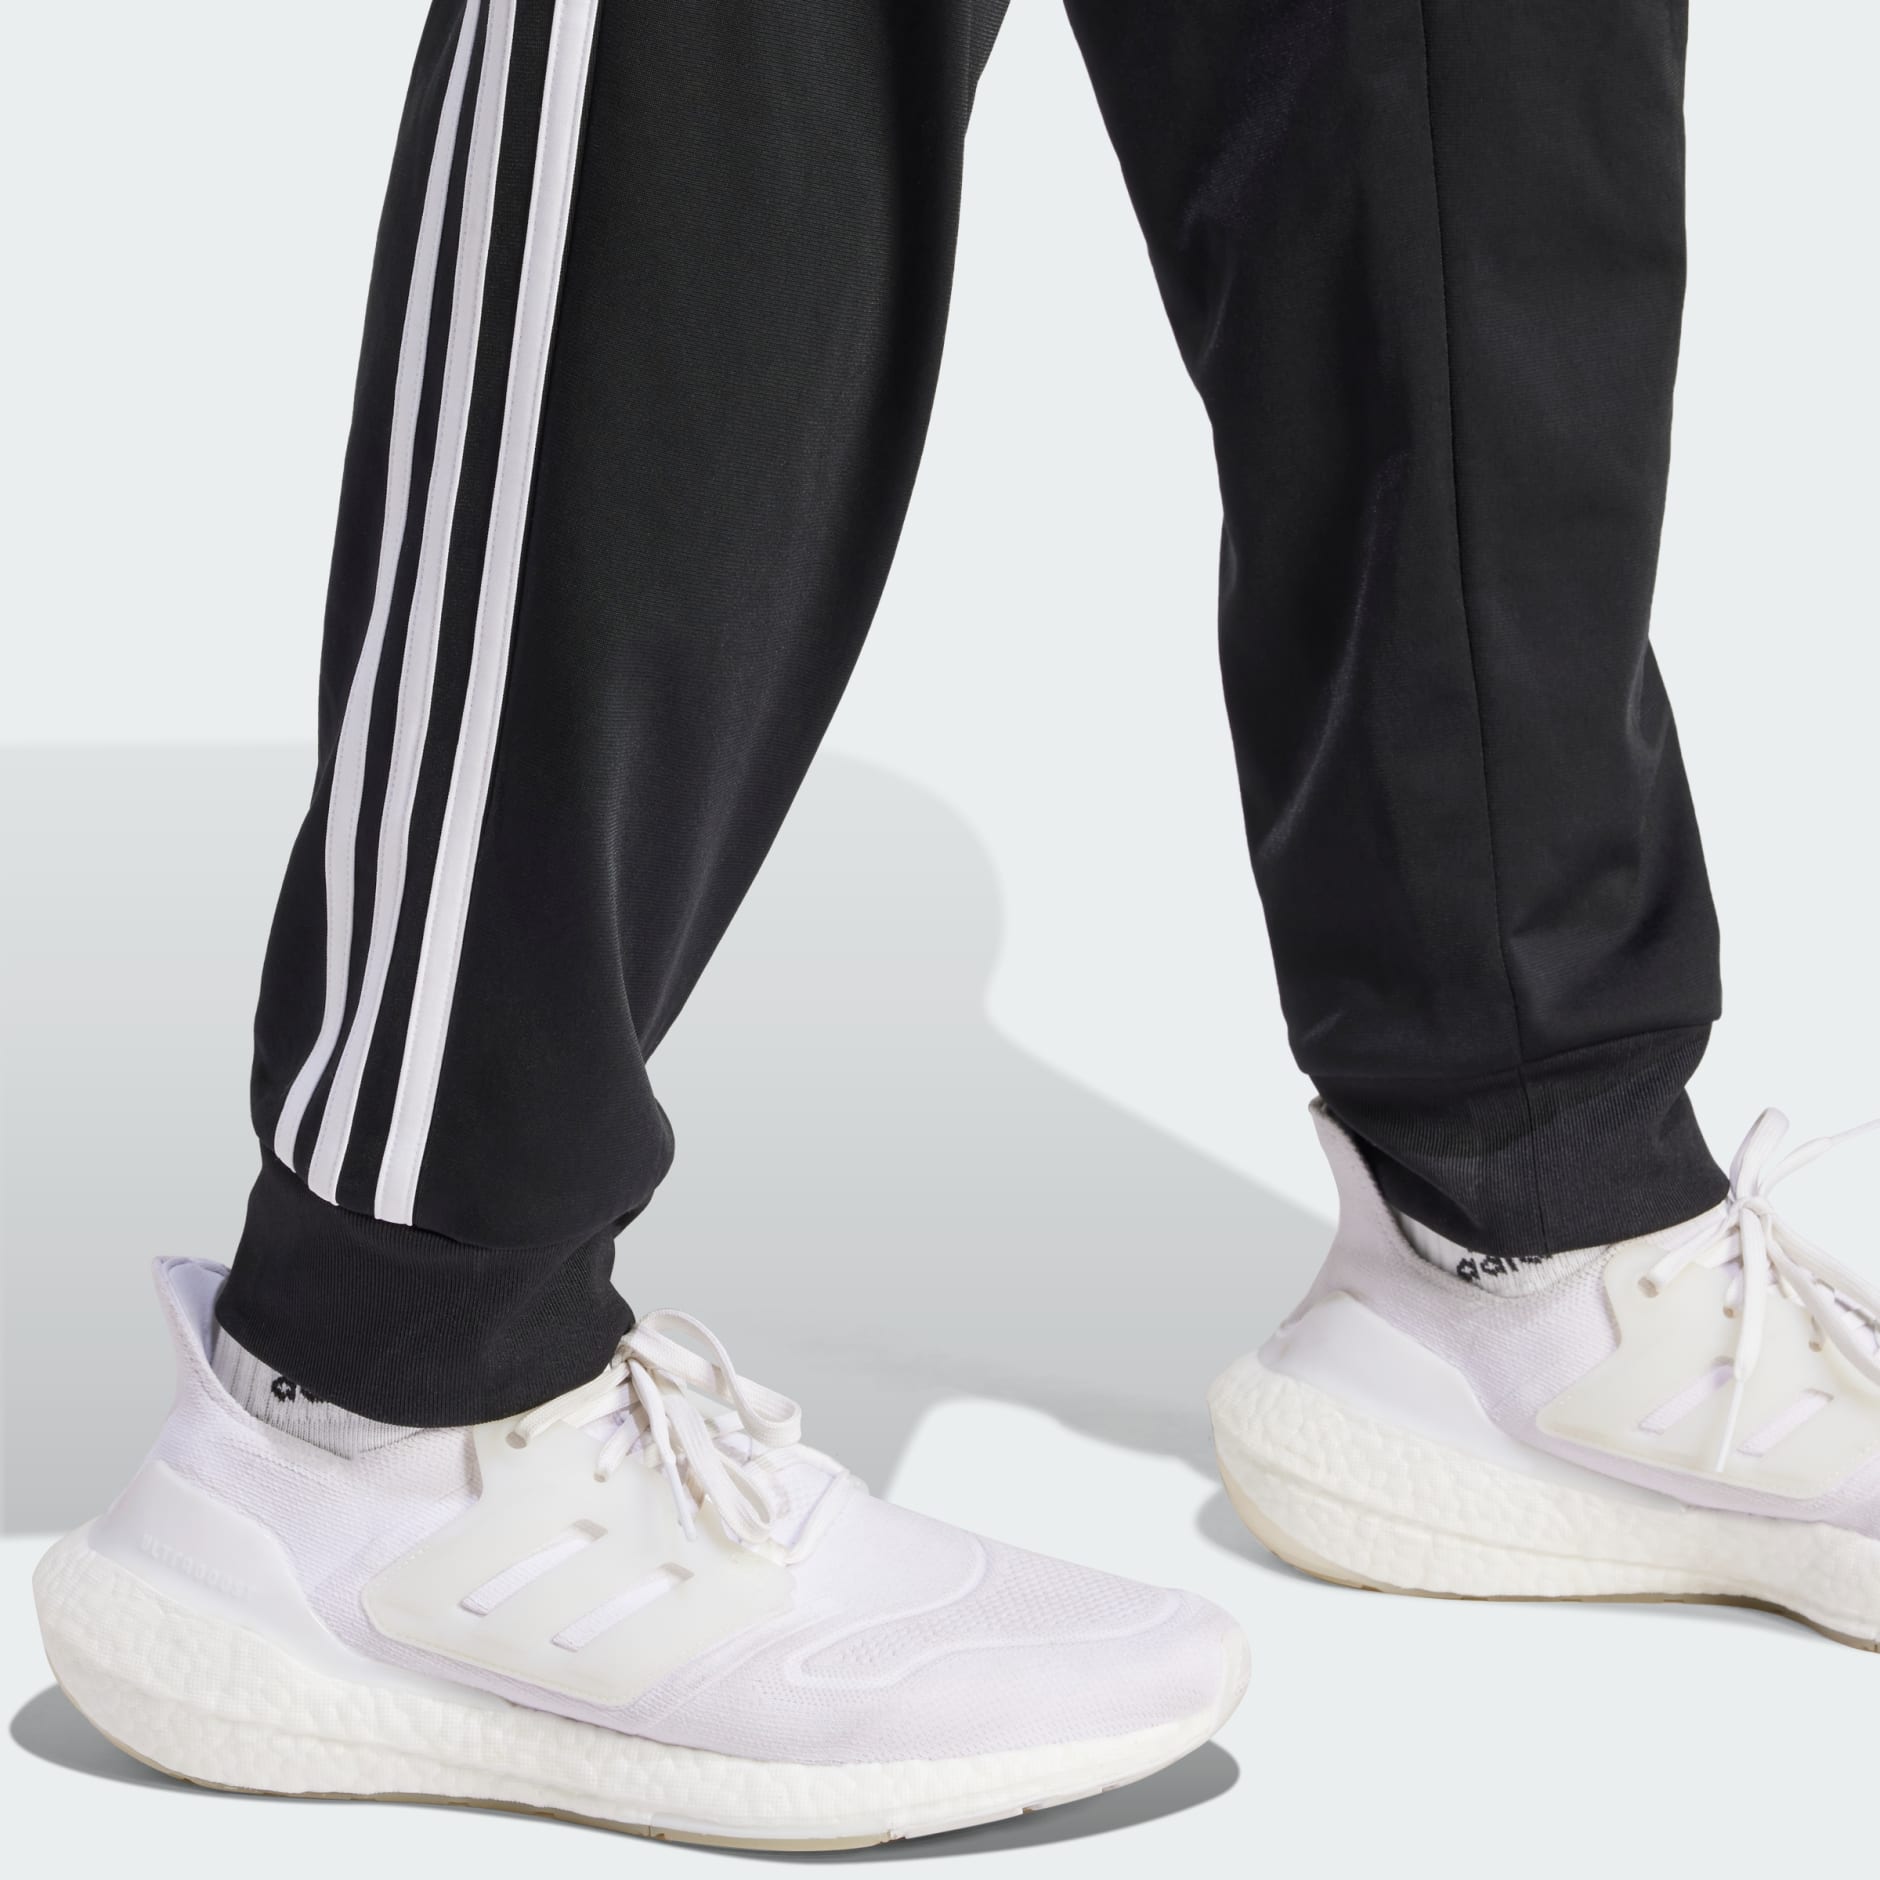 Adidas Essentials Warm-up Tapered 3-stripes Track Pants